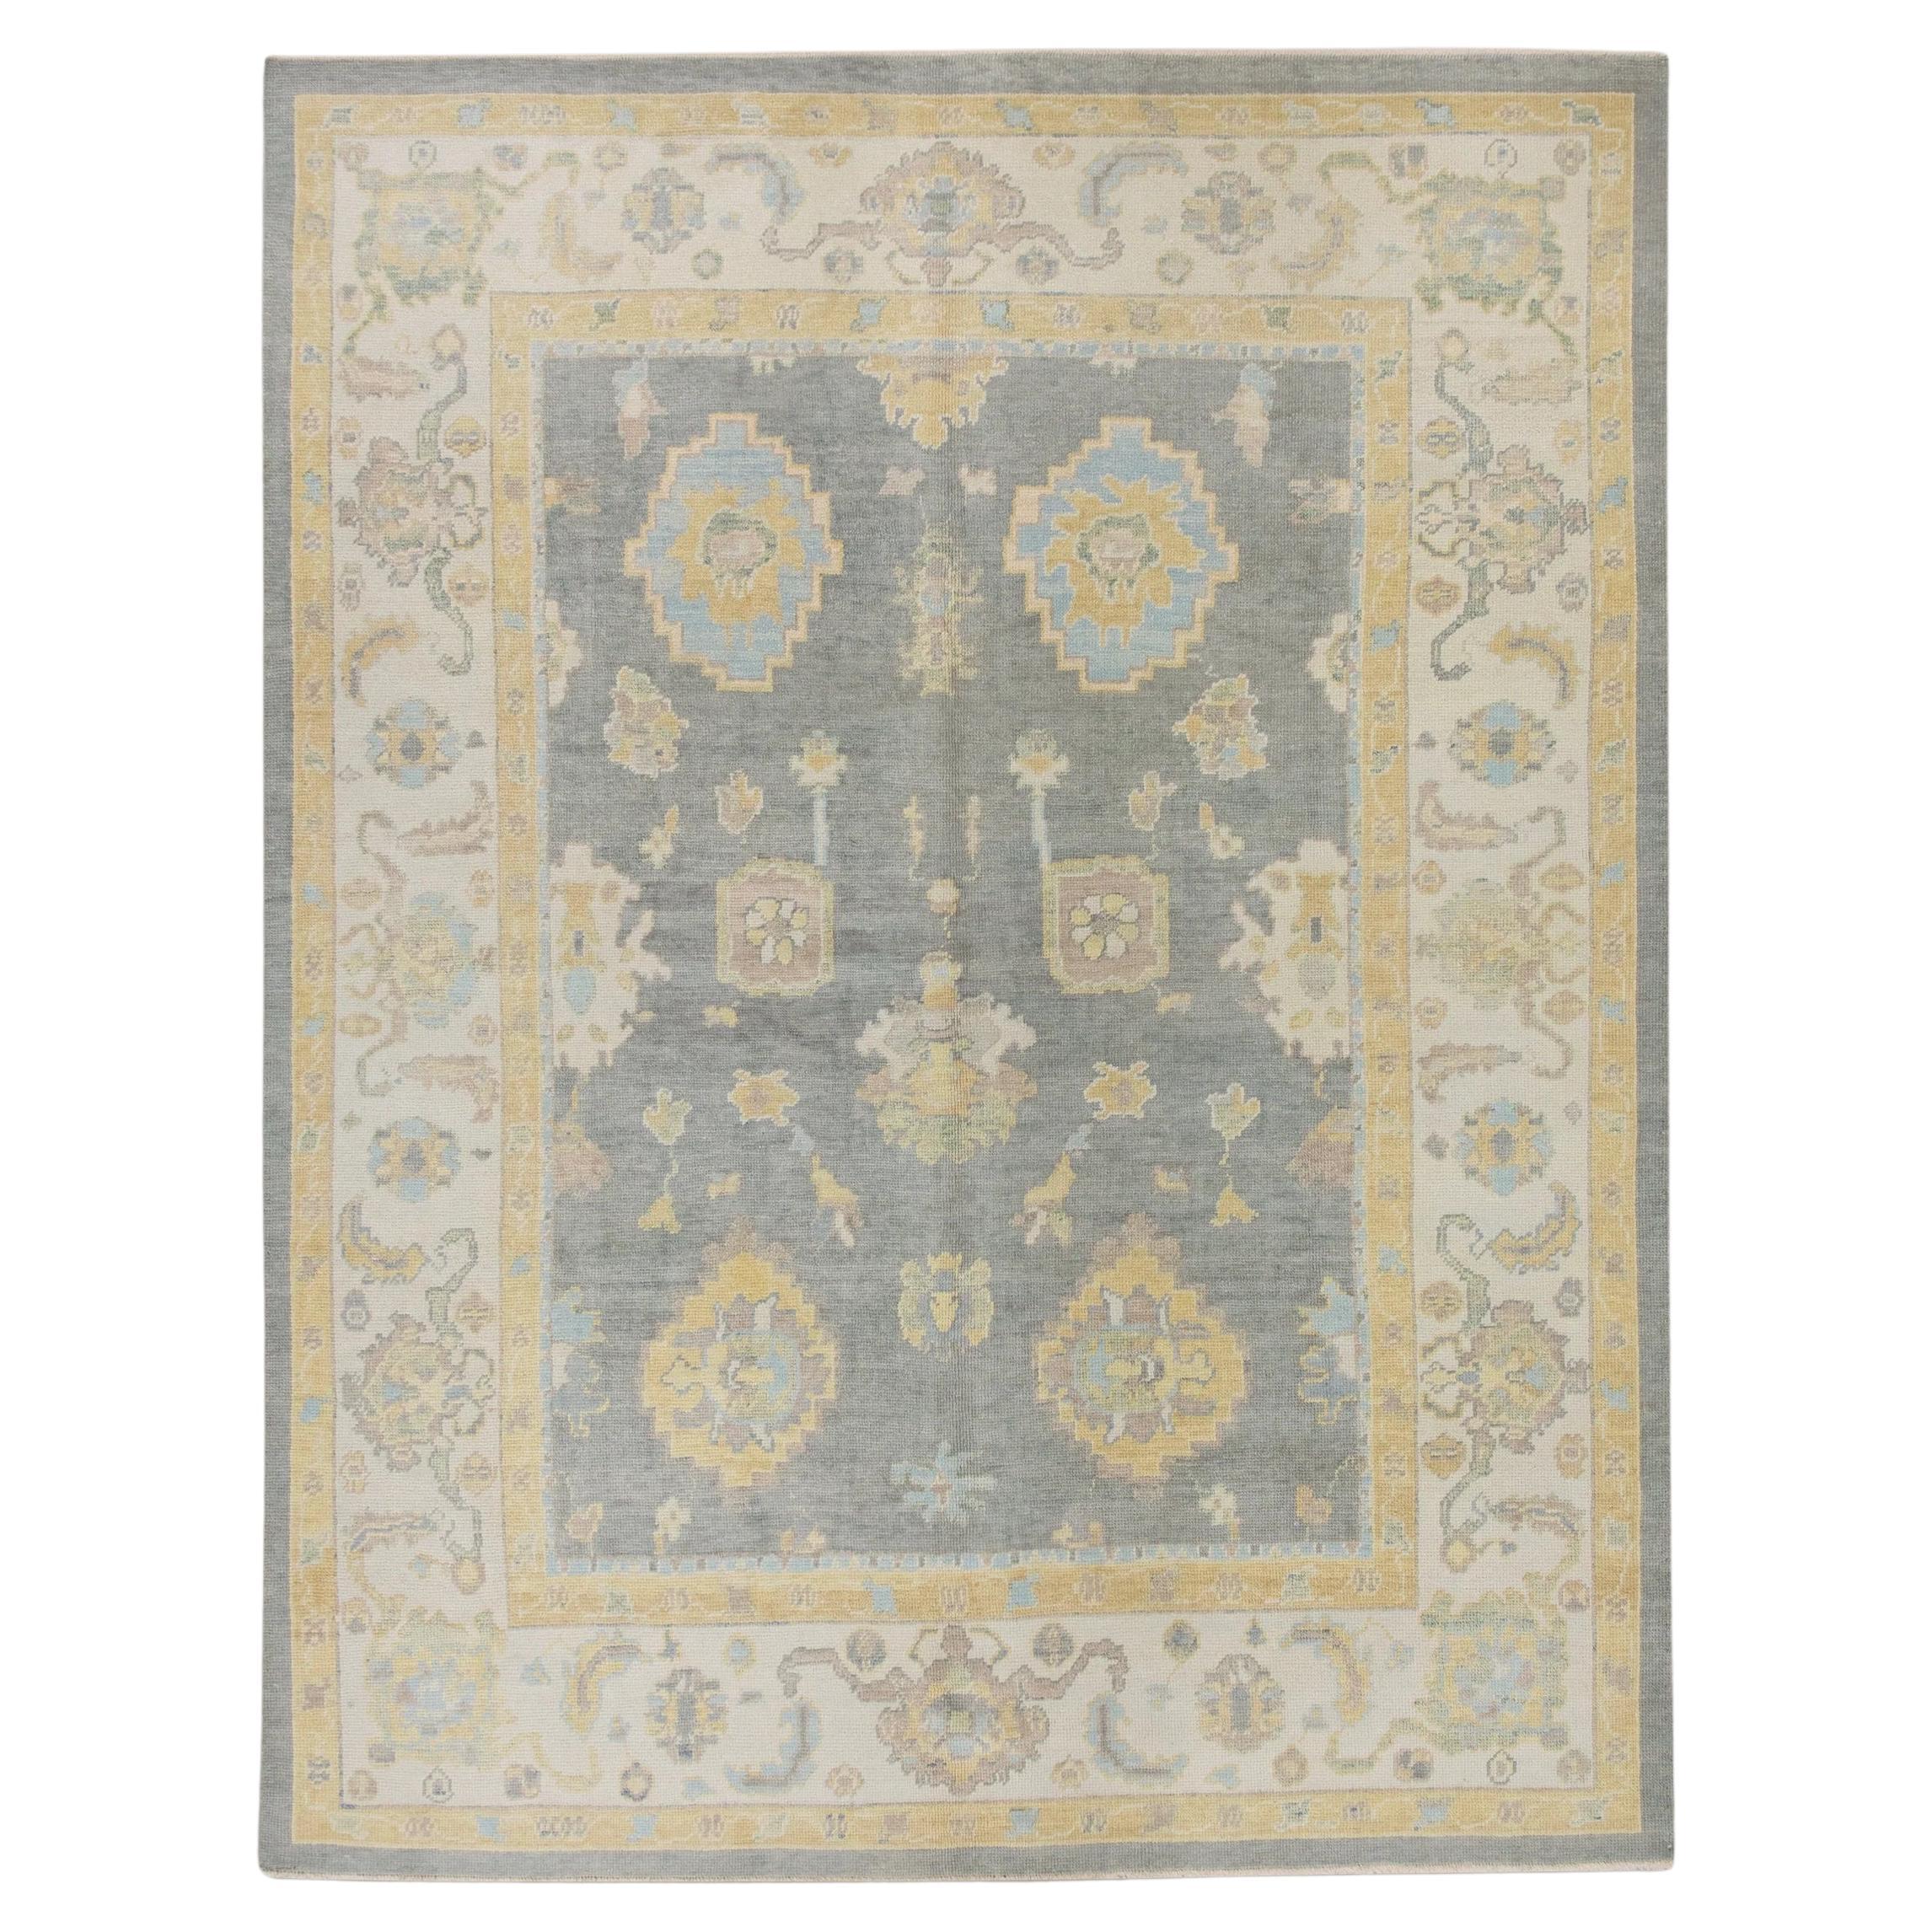 Gray & Yellow Handwoven Wool Turkish Oushak Rug in Floral Design 7'11" x 10'2"